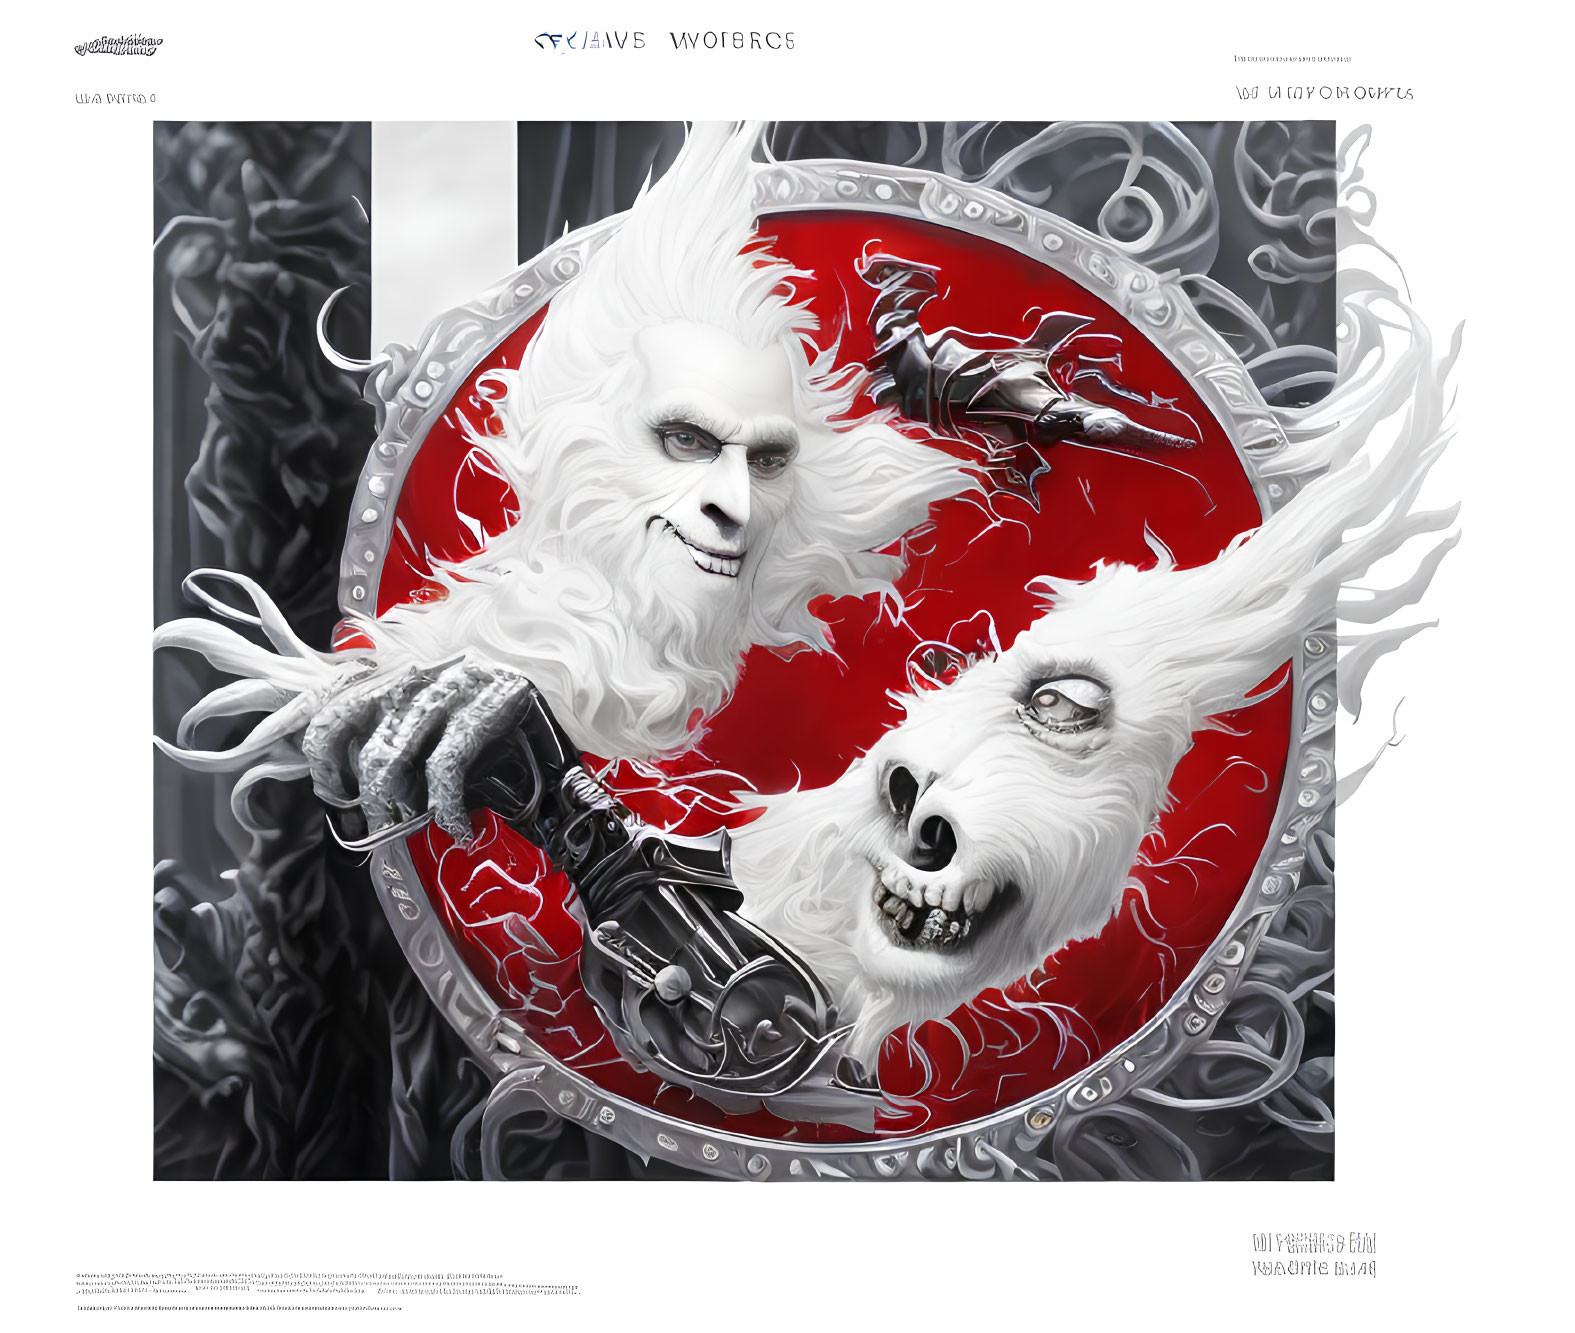 Pale figure with white hair holding a gun next to a snarling wolf in red and silver emblem